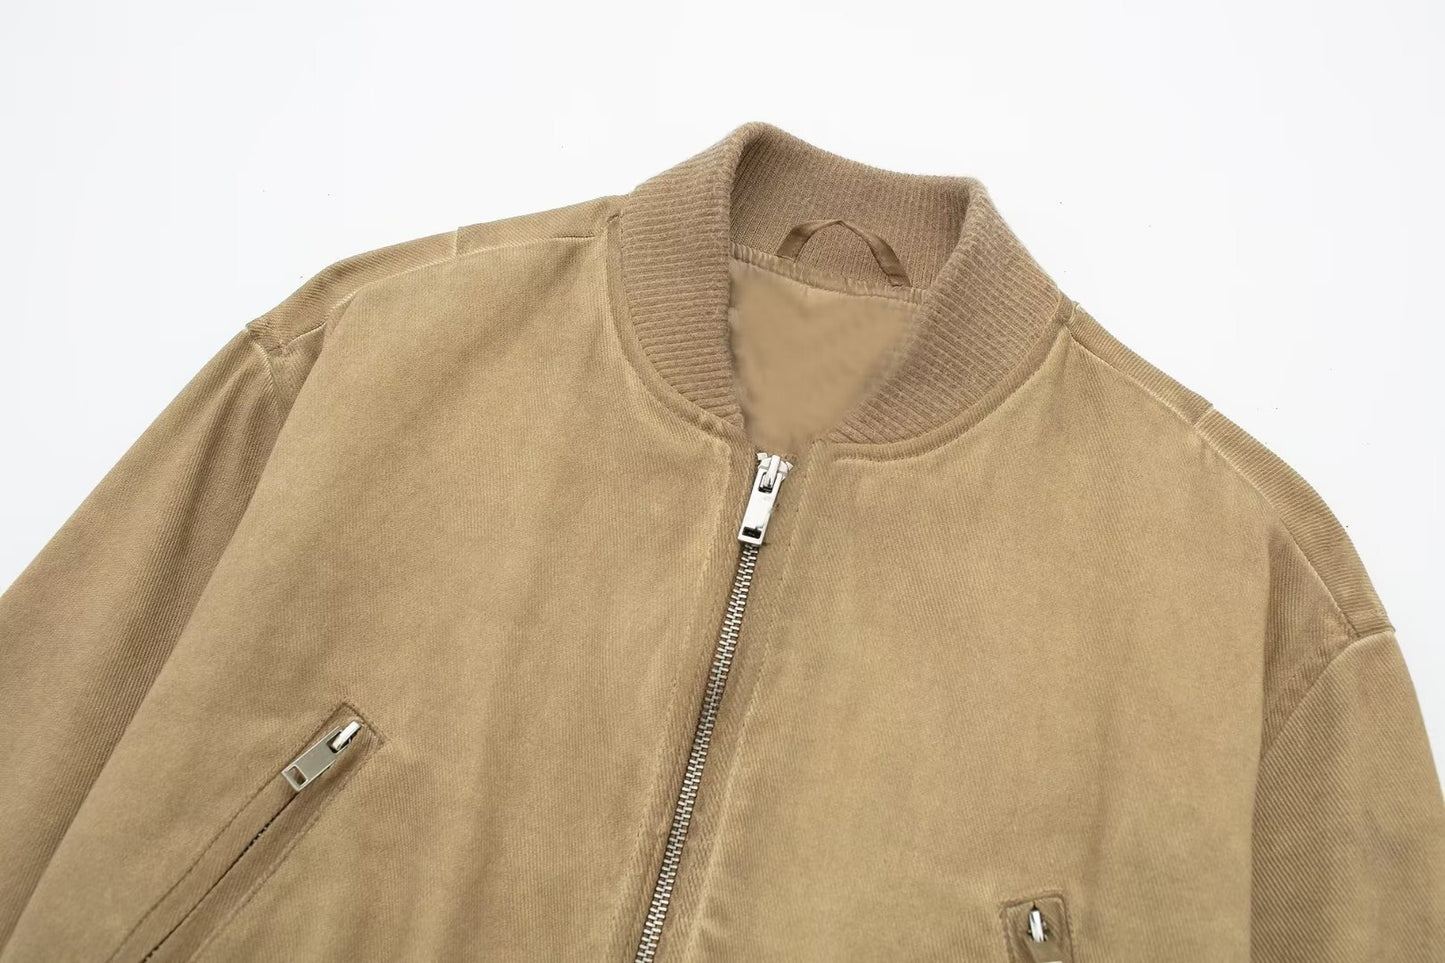 Autumn/Winter Faded Effect Bomber Jacket